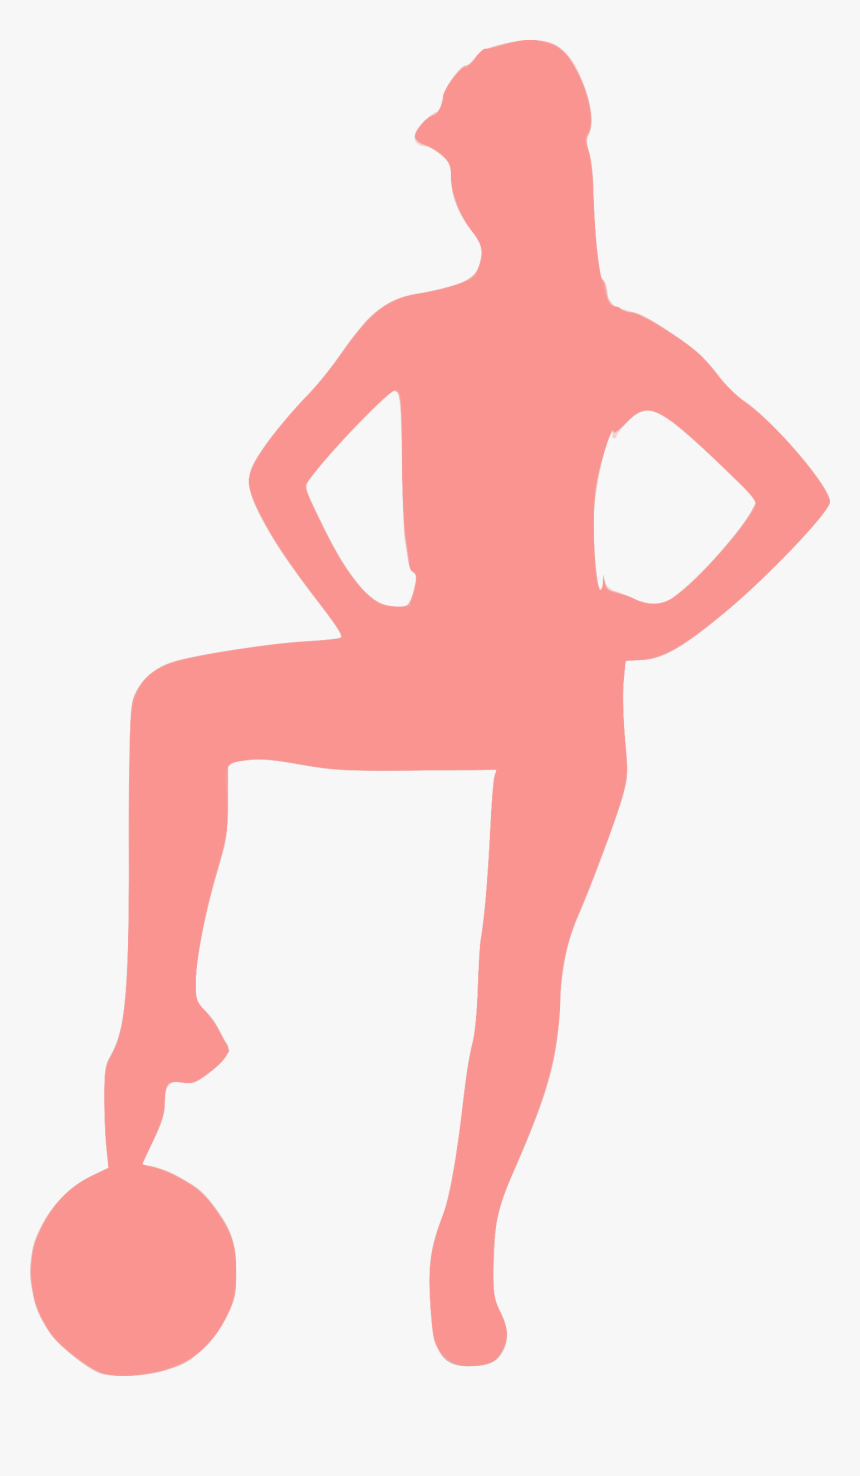 This Free Icons Png Design Of Silhouette Femme - Menina Com Bola Png, Transparent Png, Free Download